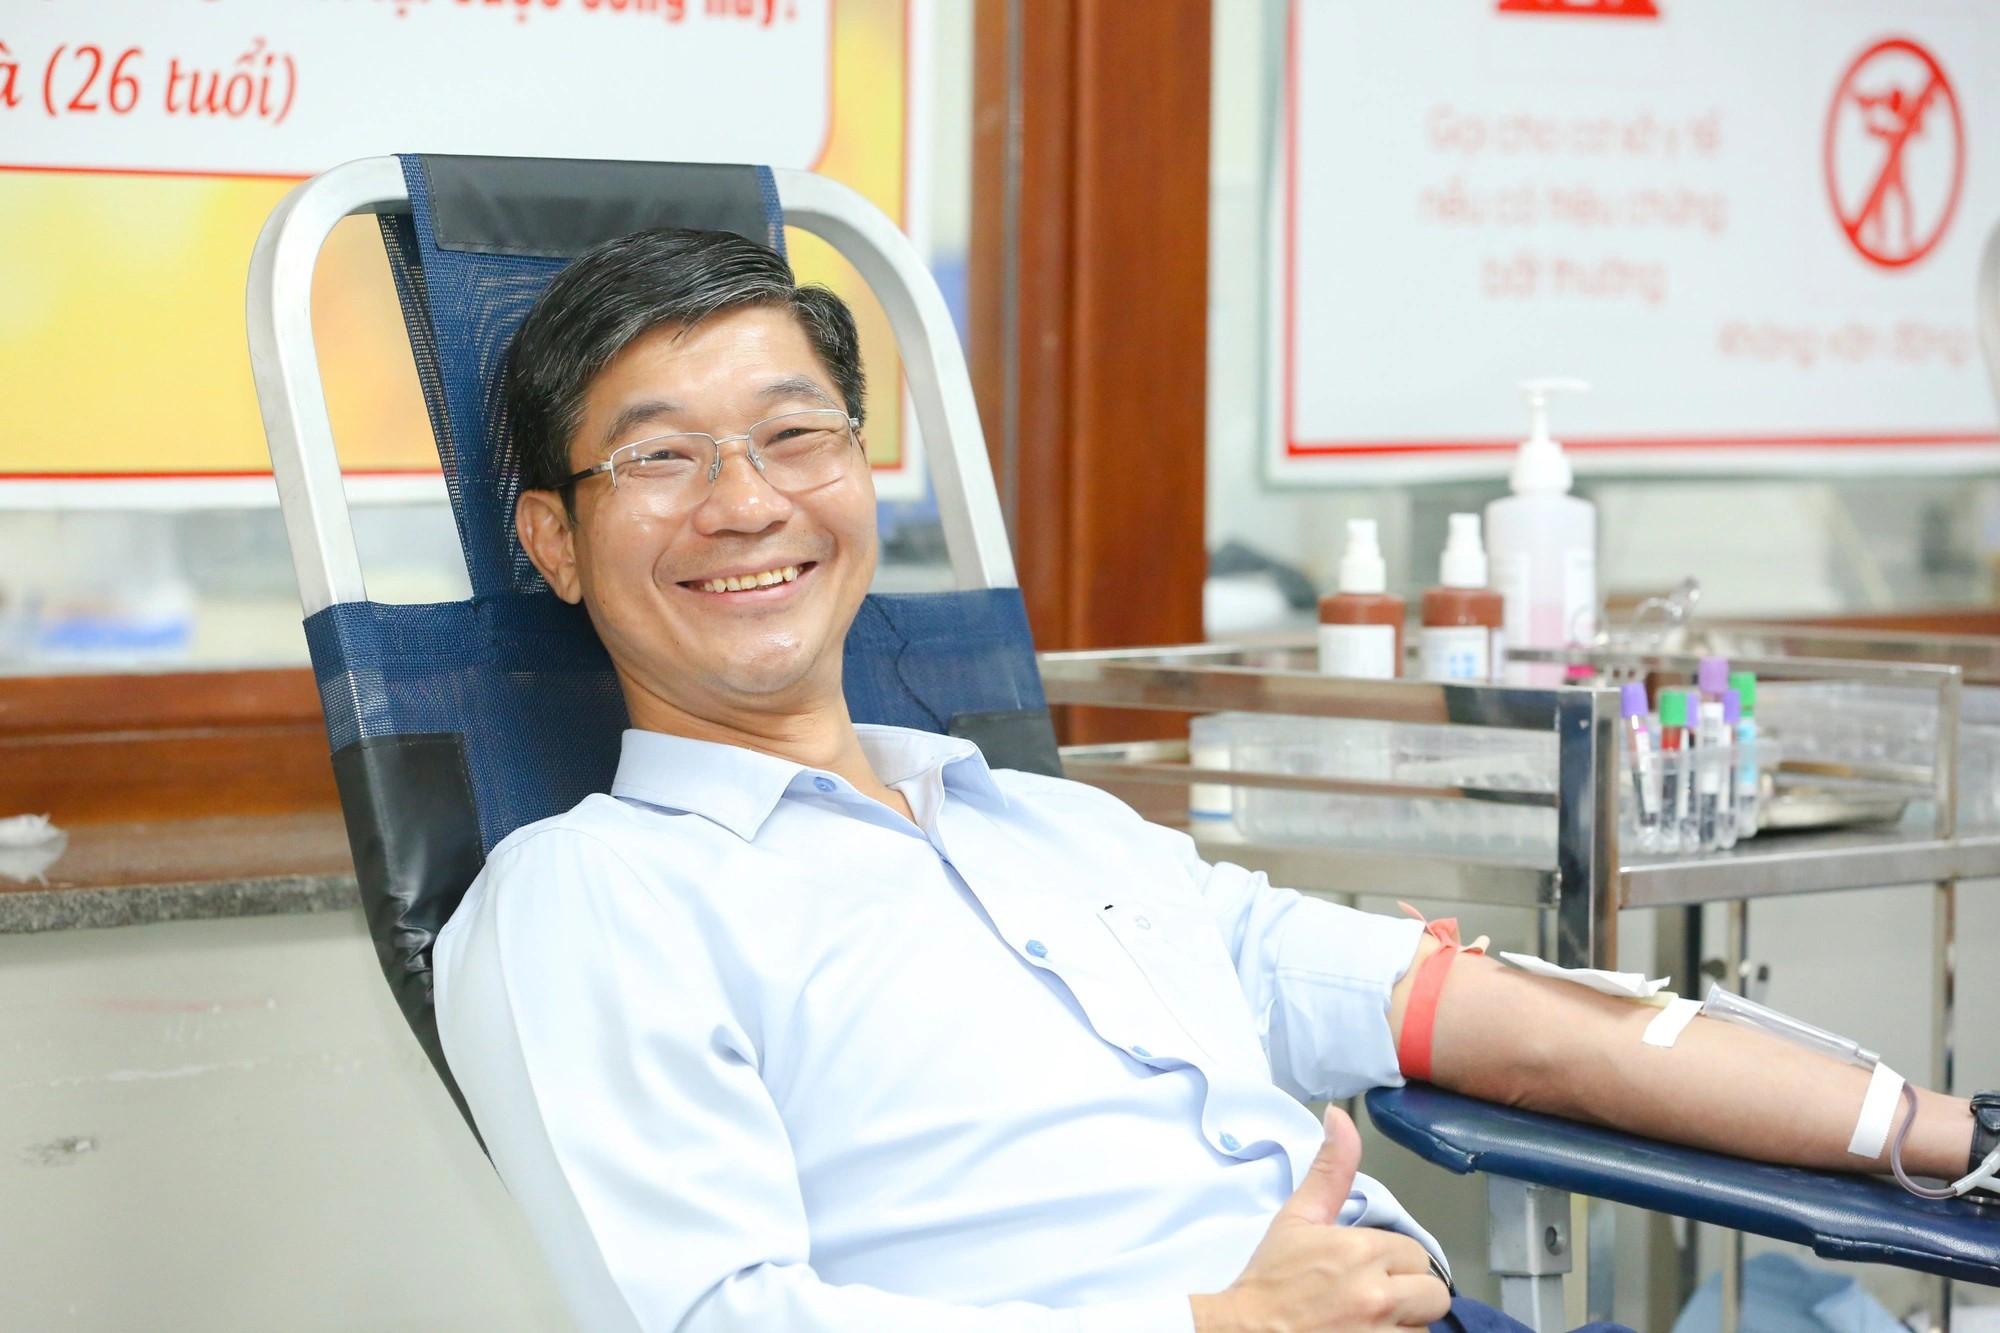 From blood donor to director of Vietnam national blood center